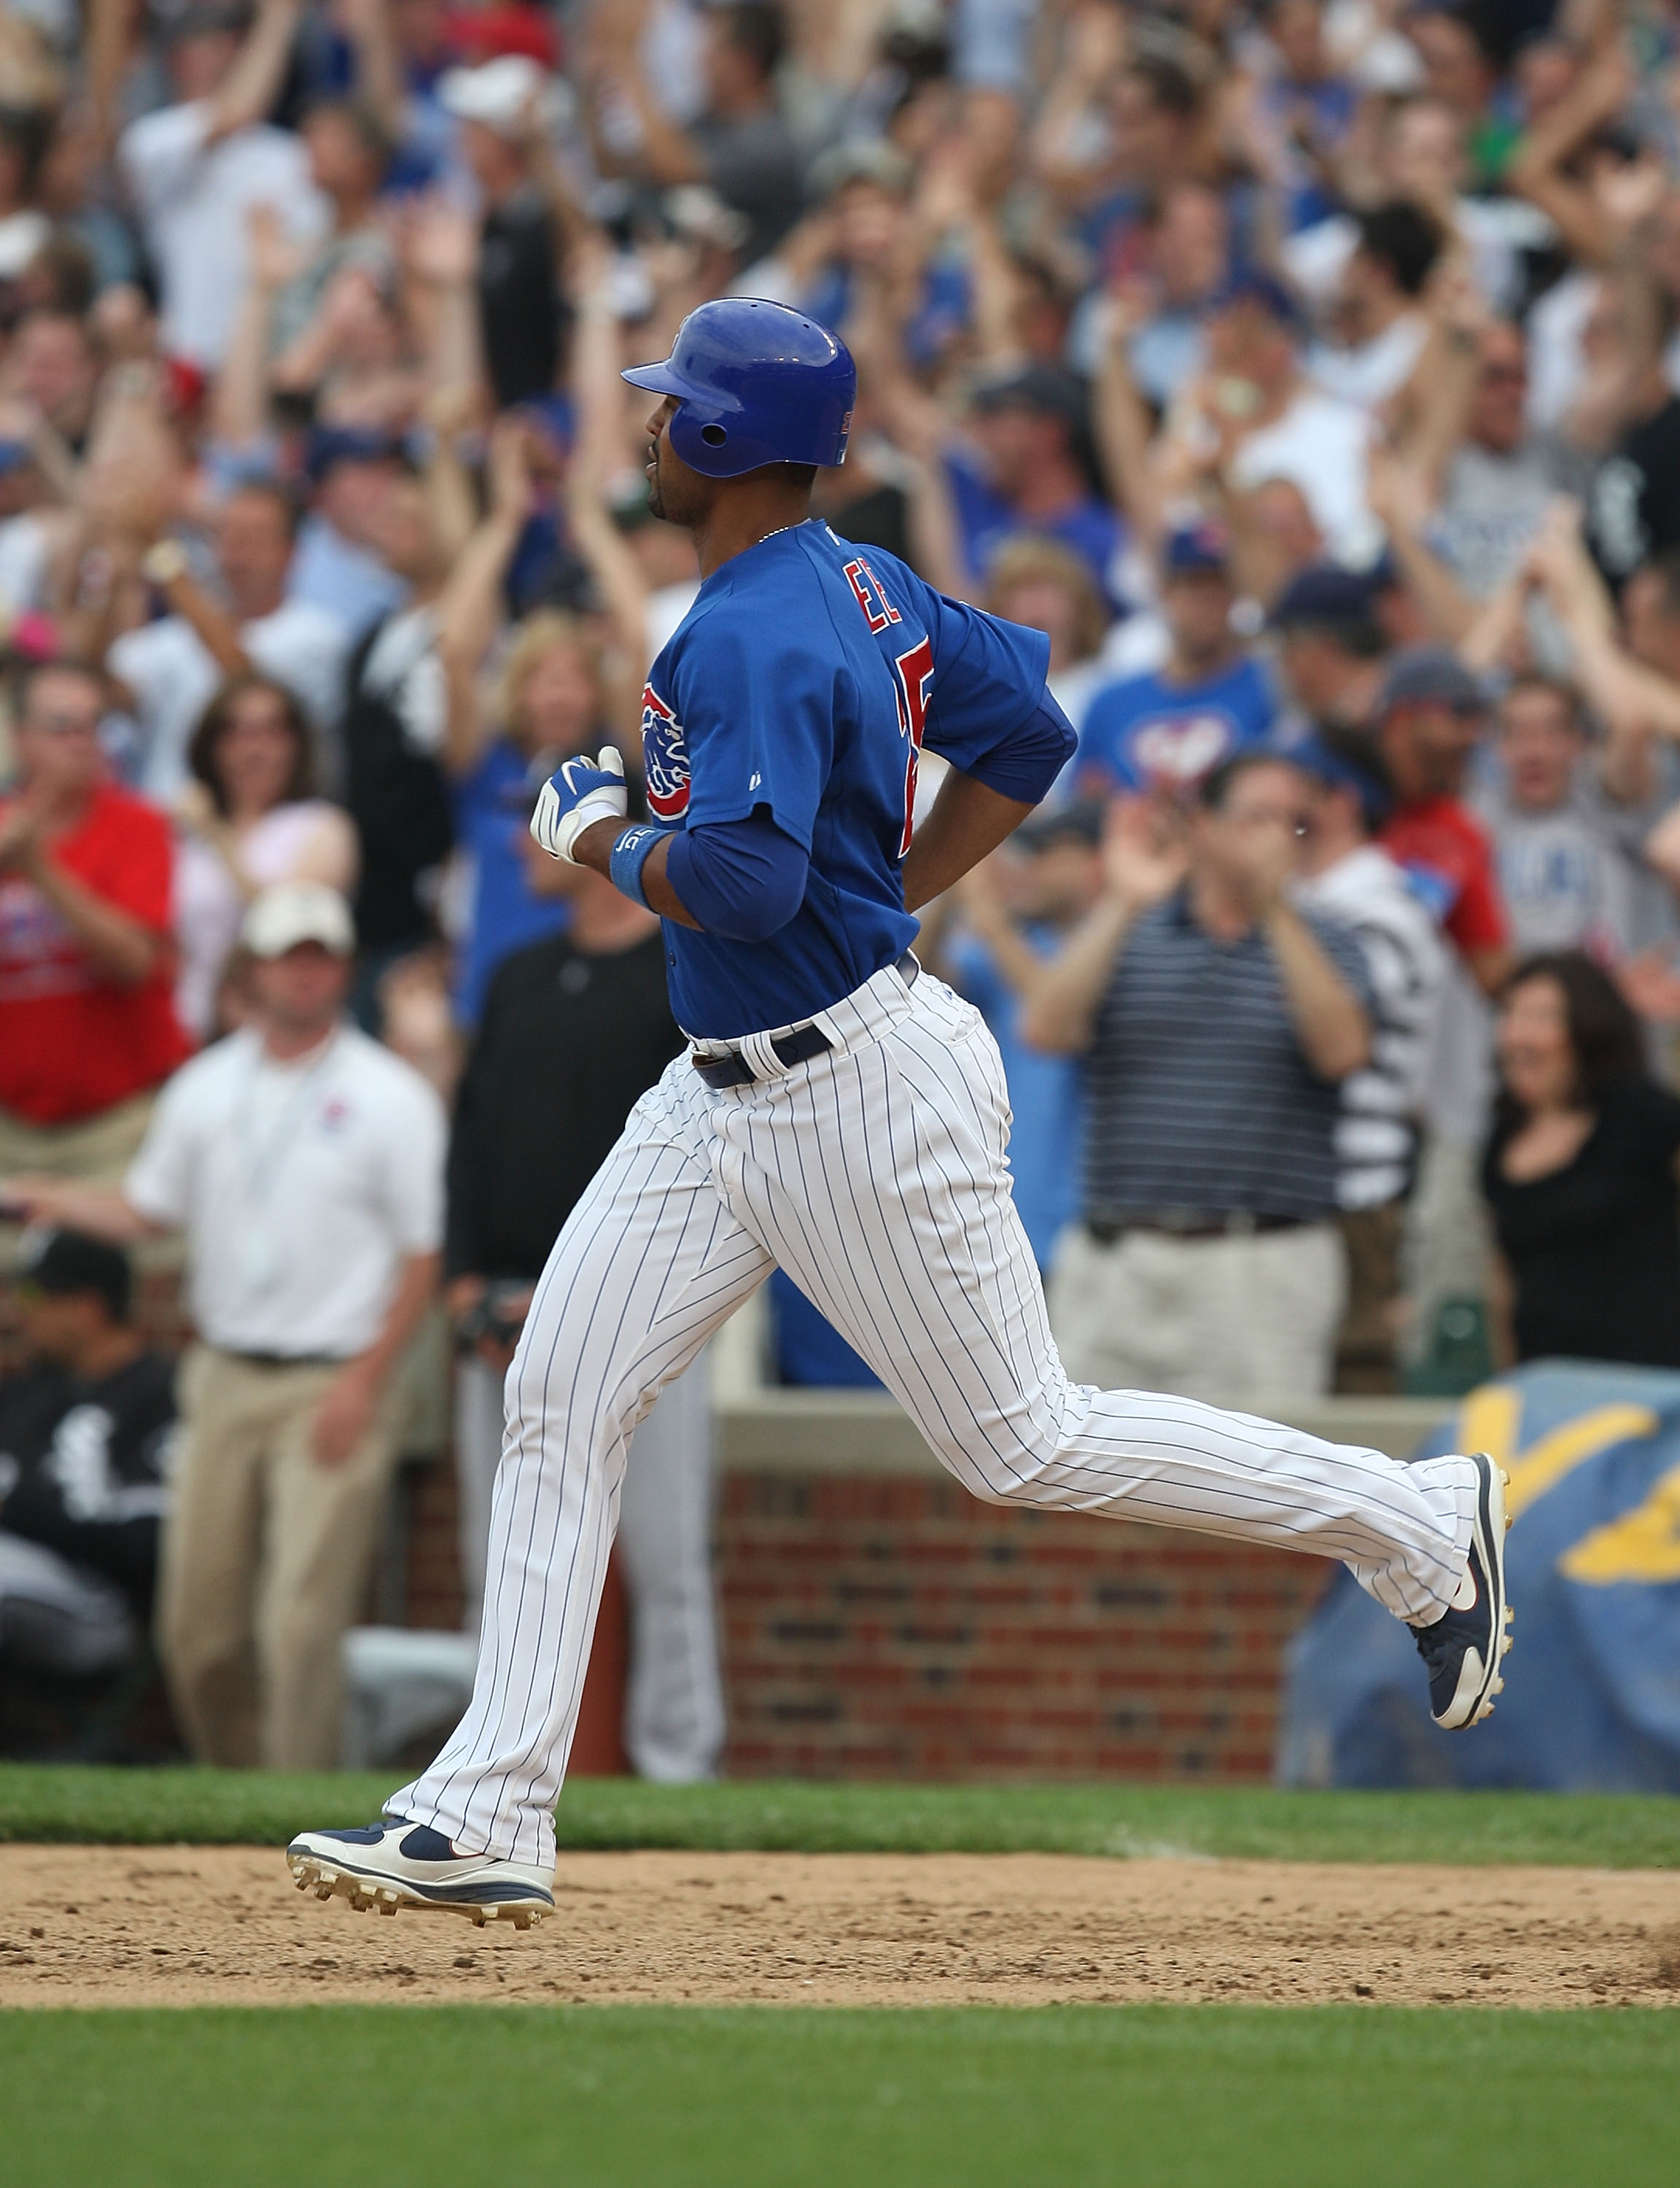 CHICAGO - JUNE 18: Derrek Lee #25 of the Chicago Cubs runs the bases after hitting a three-run home run in the 8th inning against the Chicago White Sox on June 18, 2009 at Wrigley Field in Chicago, Illinois. The Cubs defeated the White Sox 6-5. (Photo by